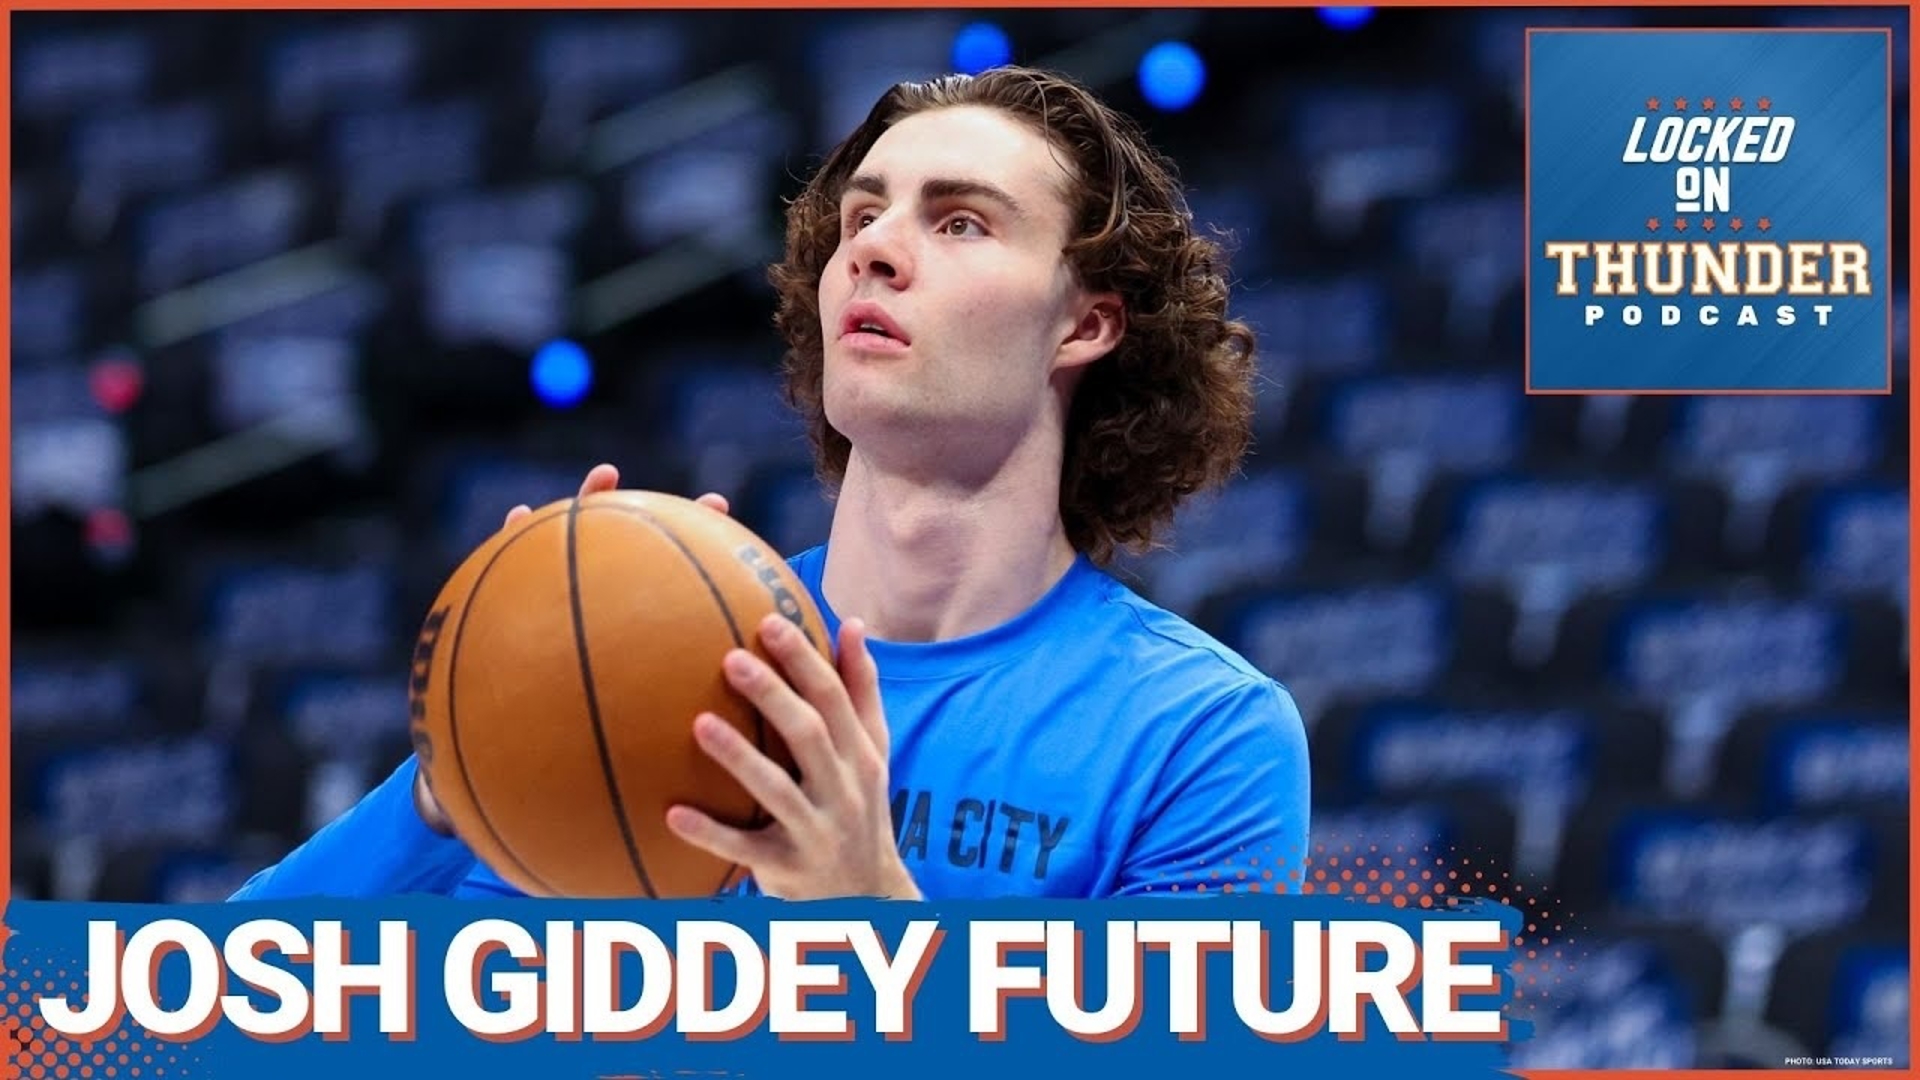 The Oklahoma City Thunder have a difficult decision to make on guard Josh Giddey. Giddey wants to be with the OKC Thunder, but can both sides benefit from a shift?